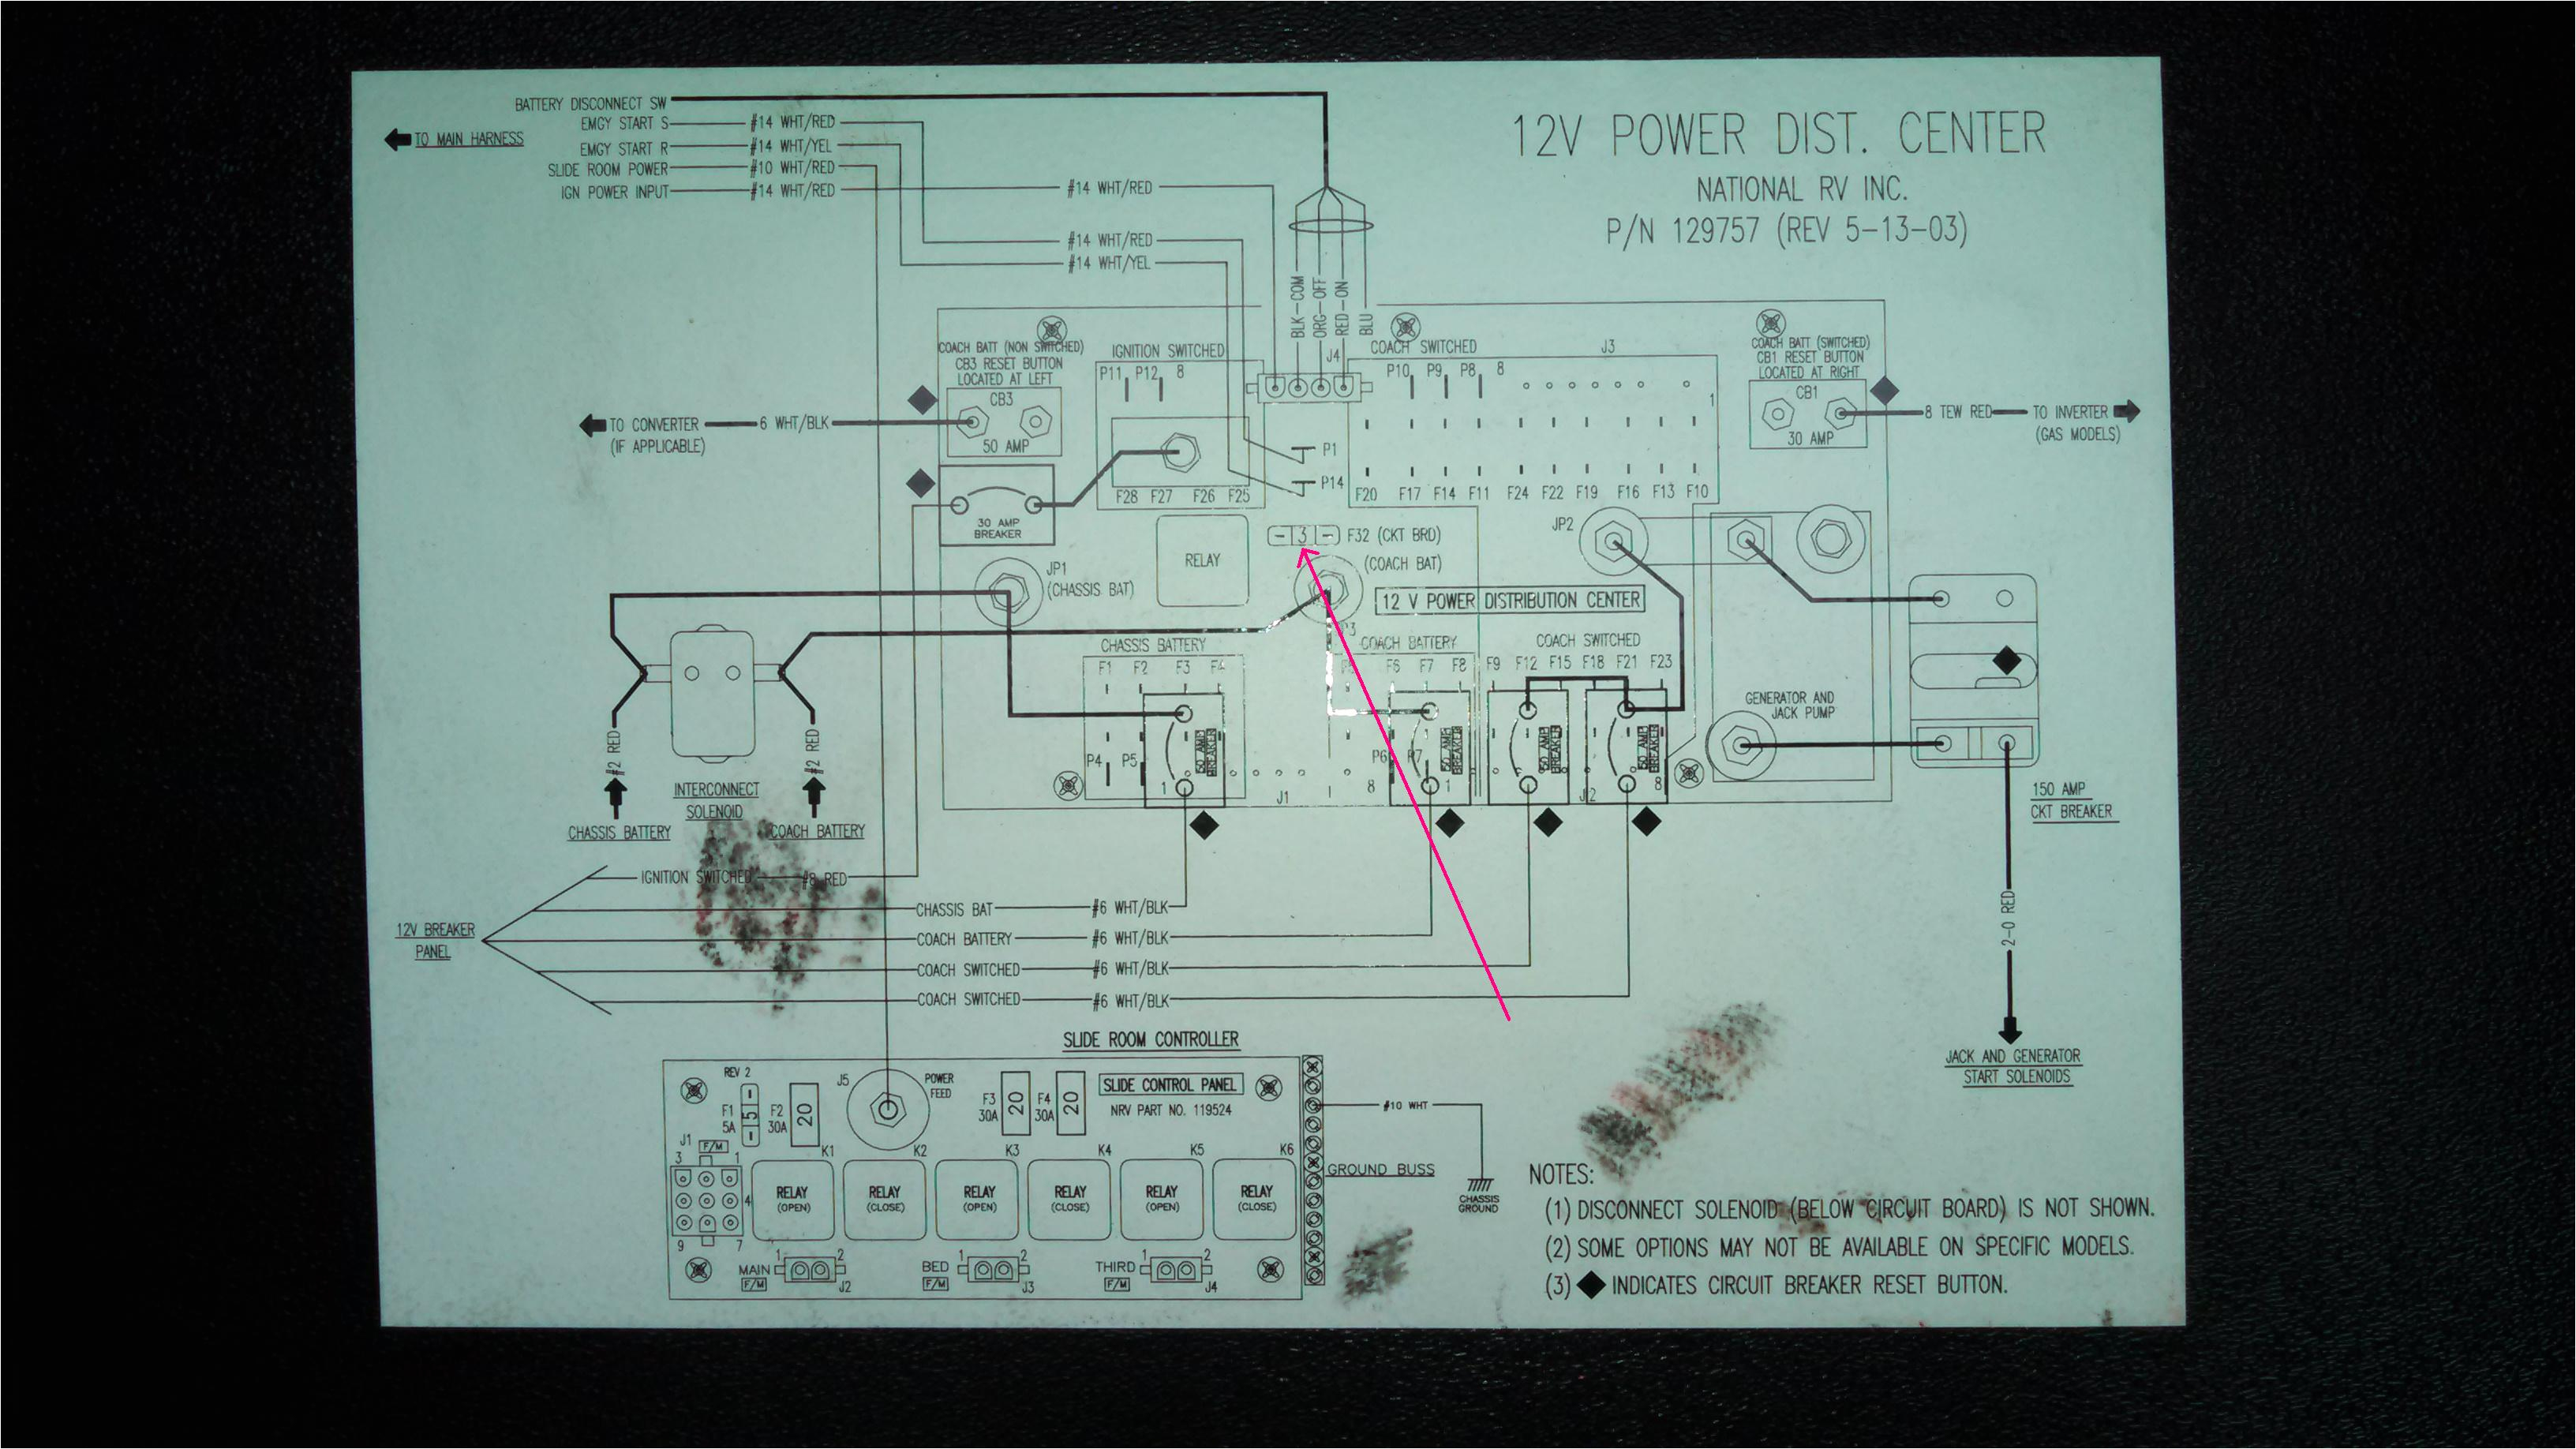 wiring diagram national dolphin wiring library this image has been resized click this bar to view